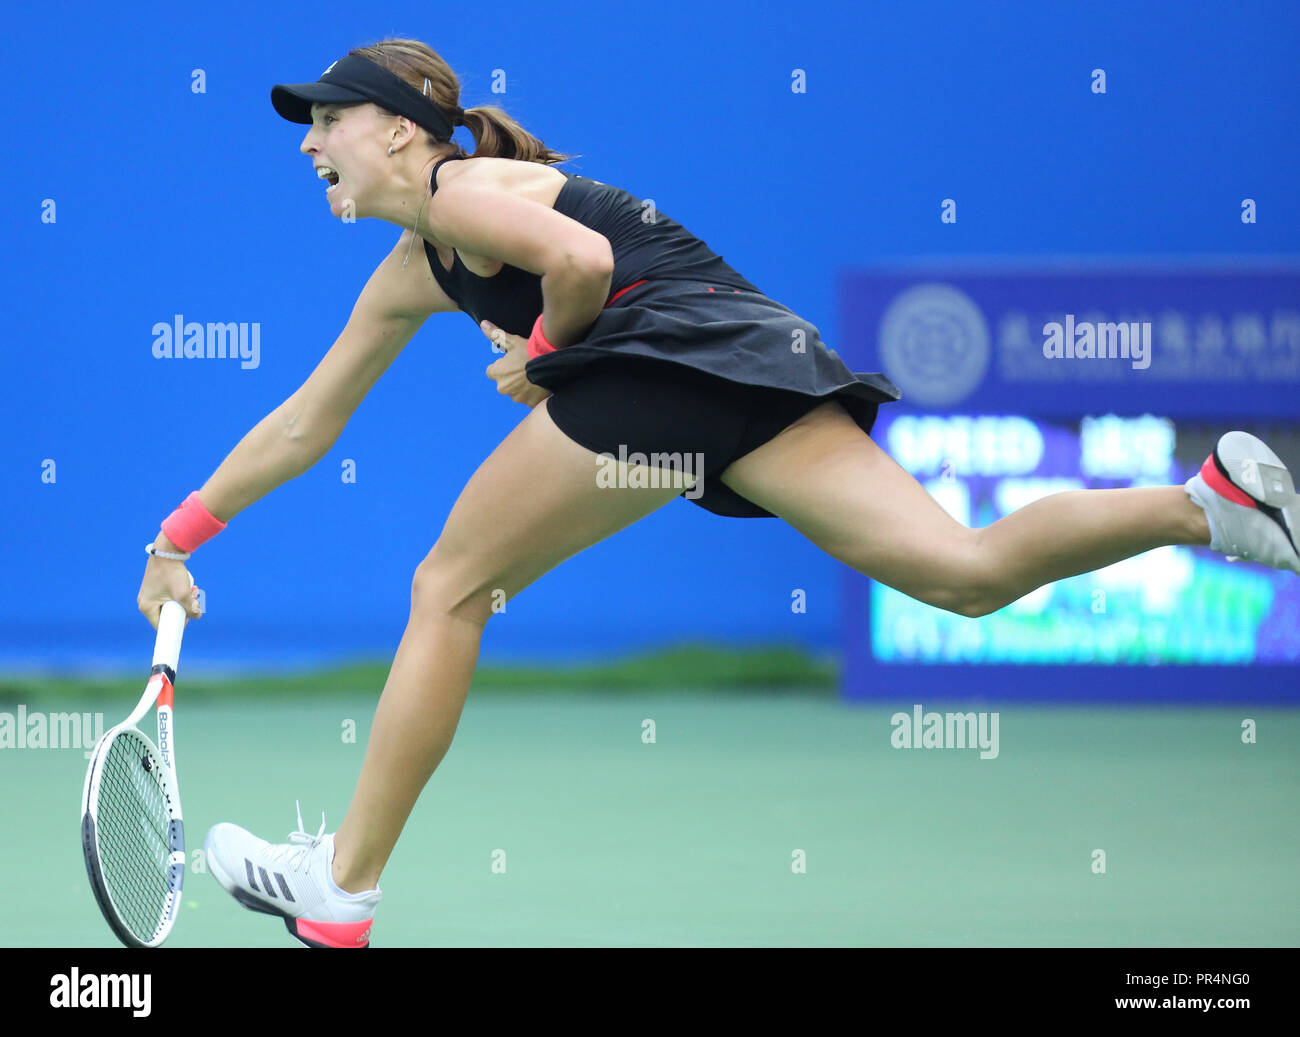 Wuhan, Wuhan, China. 29th Sep, 2018. Wuhan, CHINA-Estonian professional tennis player Anett Kontaveit defeats Wang Qiang at 2018 Wuhan Open in Wuhan, central ChinaÃ¢â‚¬â„¢s Hubei Province. Credit: SIPA Asia/ZUMA Wire/Alamy Live News Stock Photo